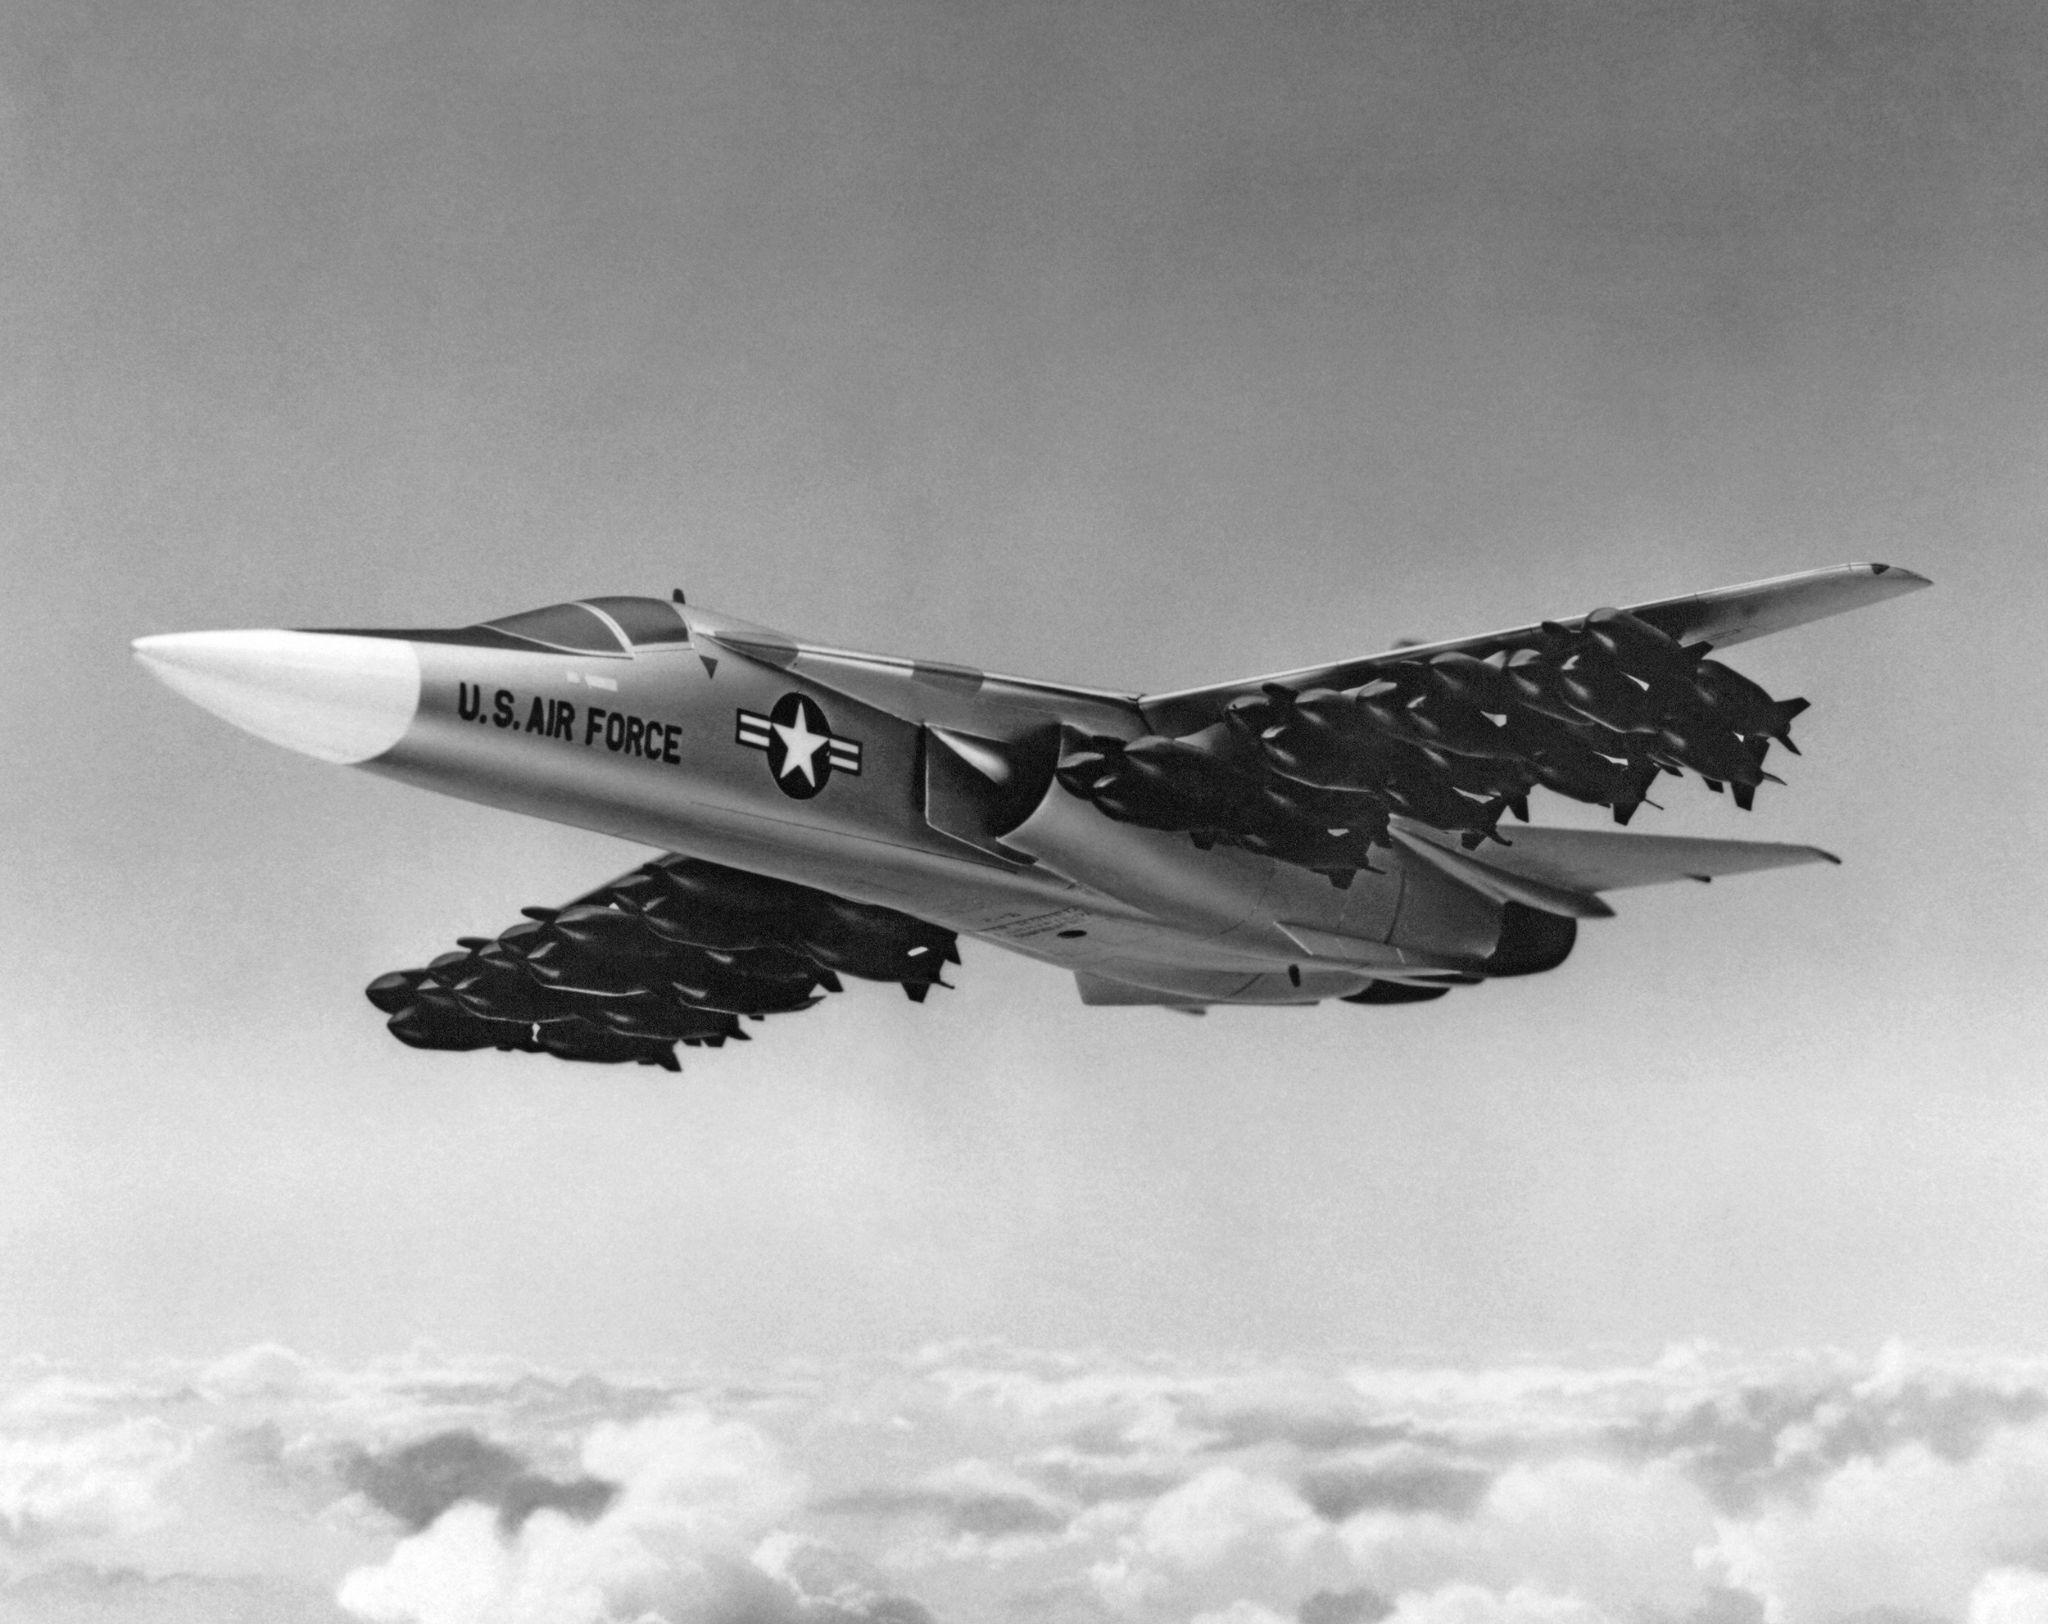 An illustration of the dynamic F-111 Aardvark bomber during the 1960s